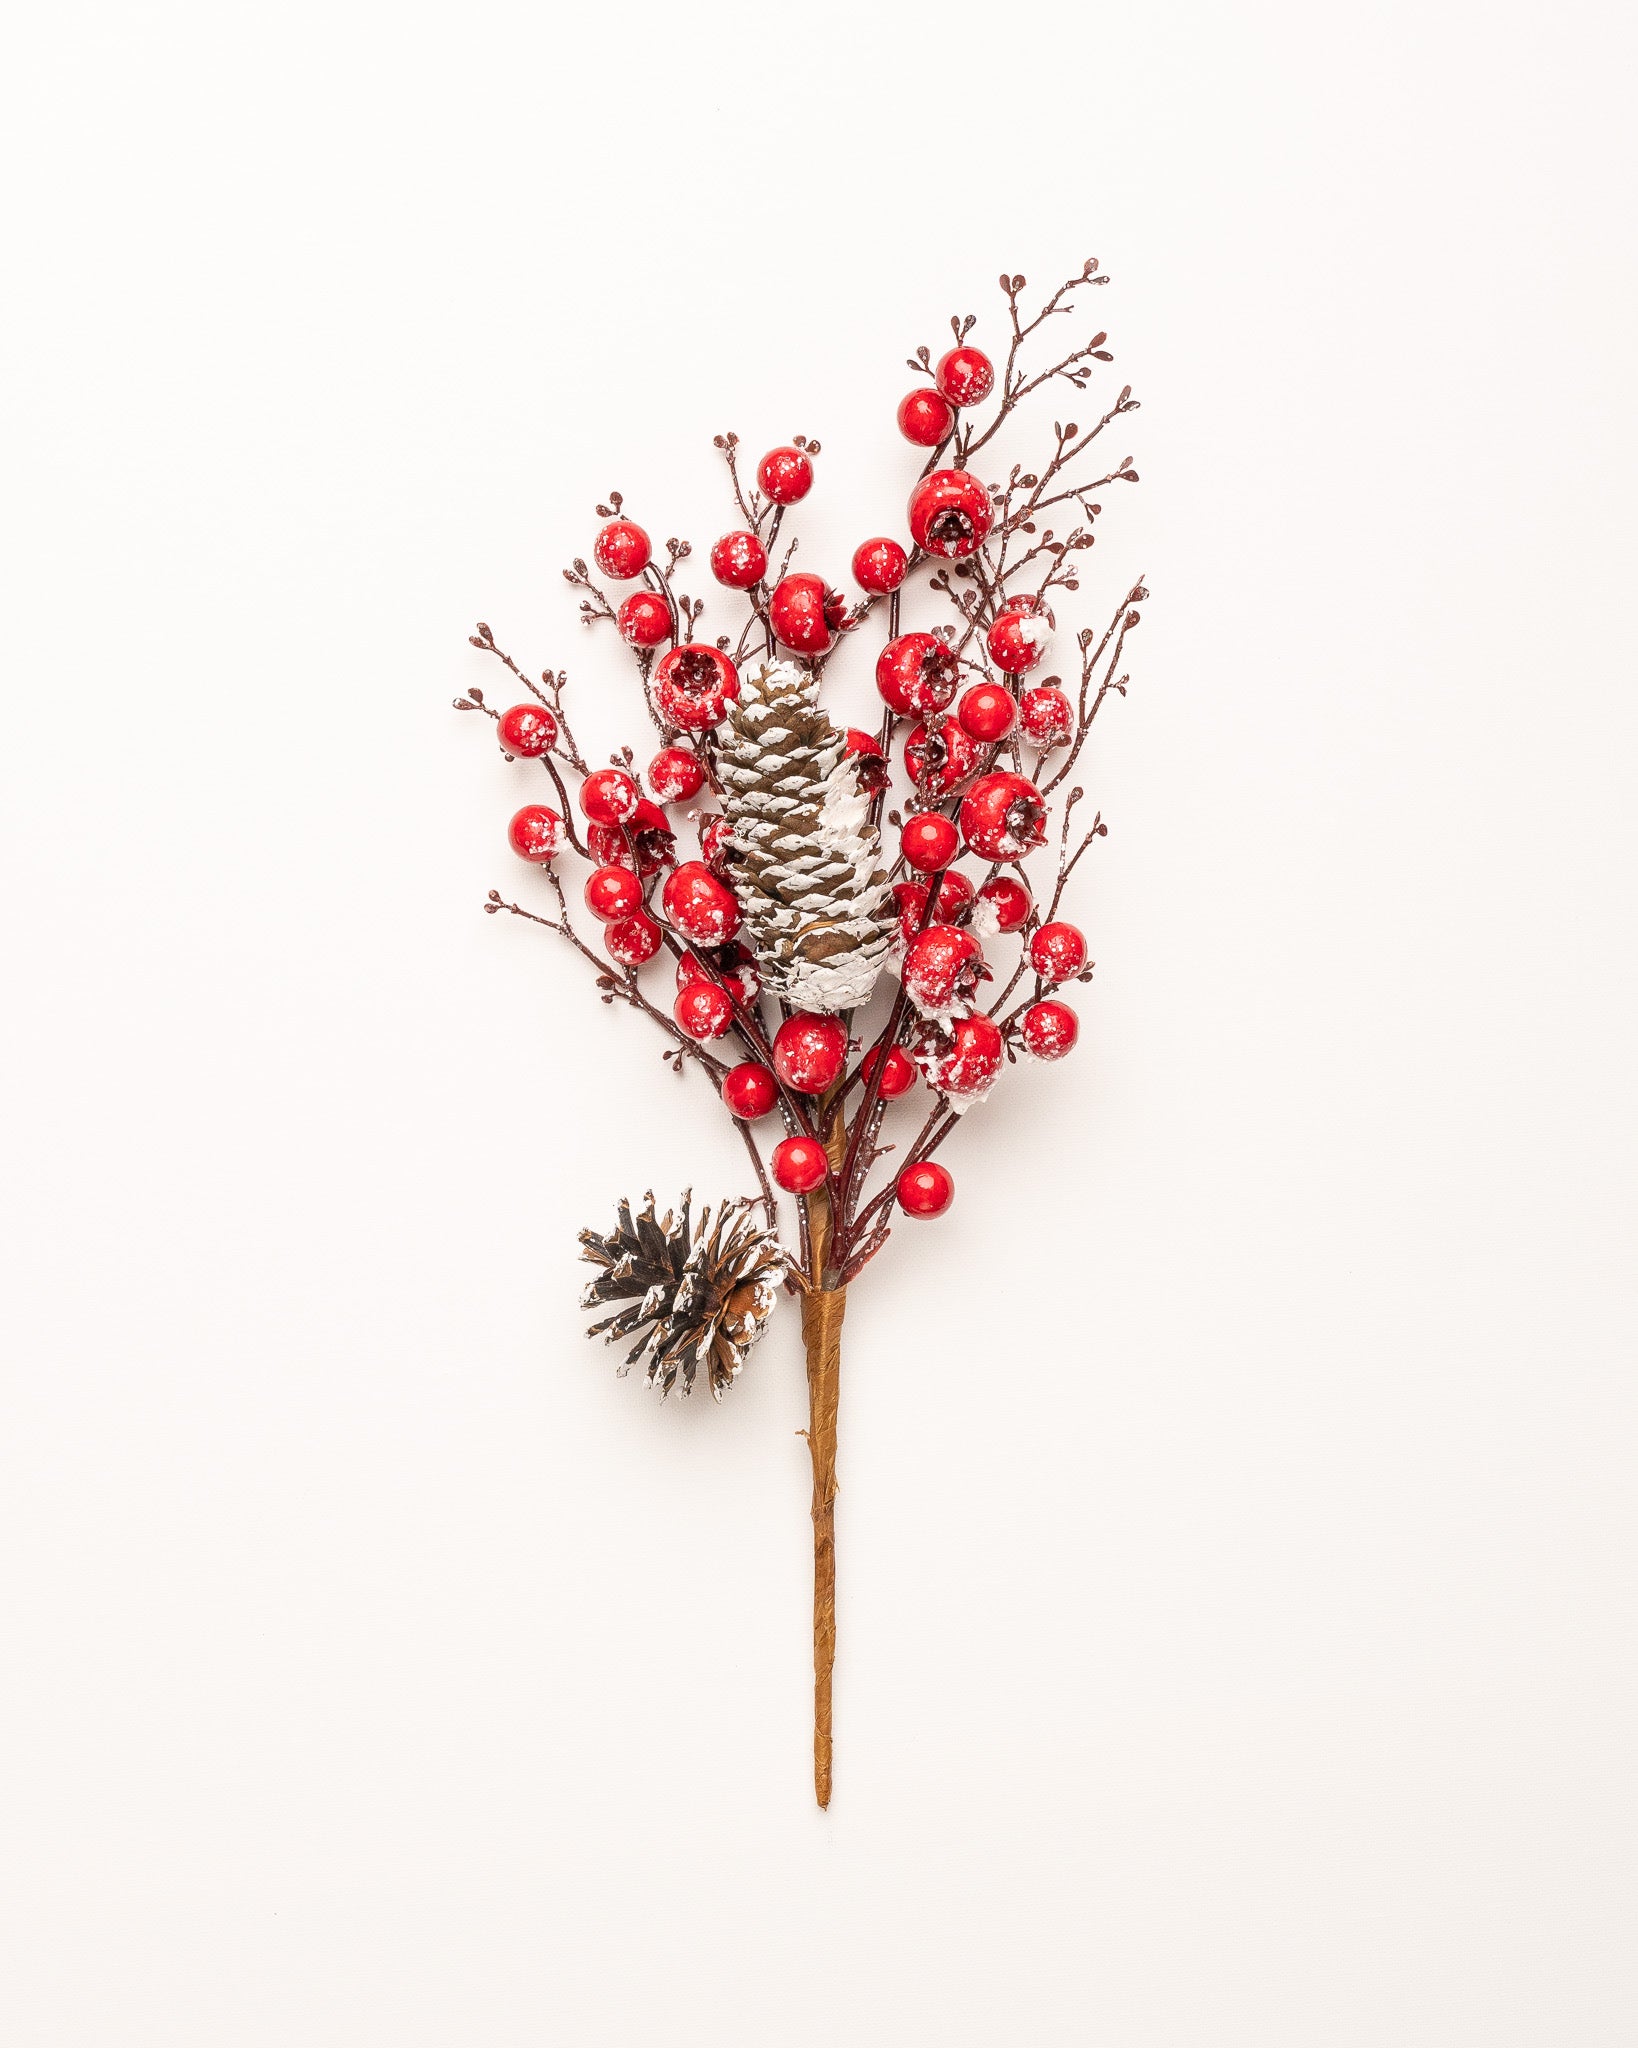 Set of 24: Red Holly Berry Stems with 35 Lifelike Berries